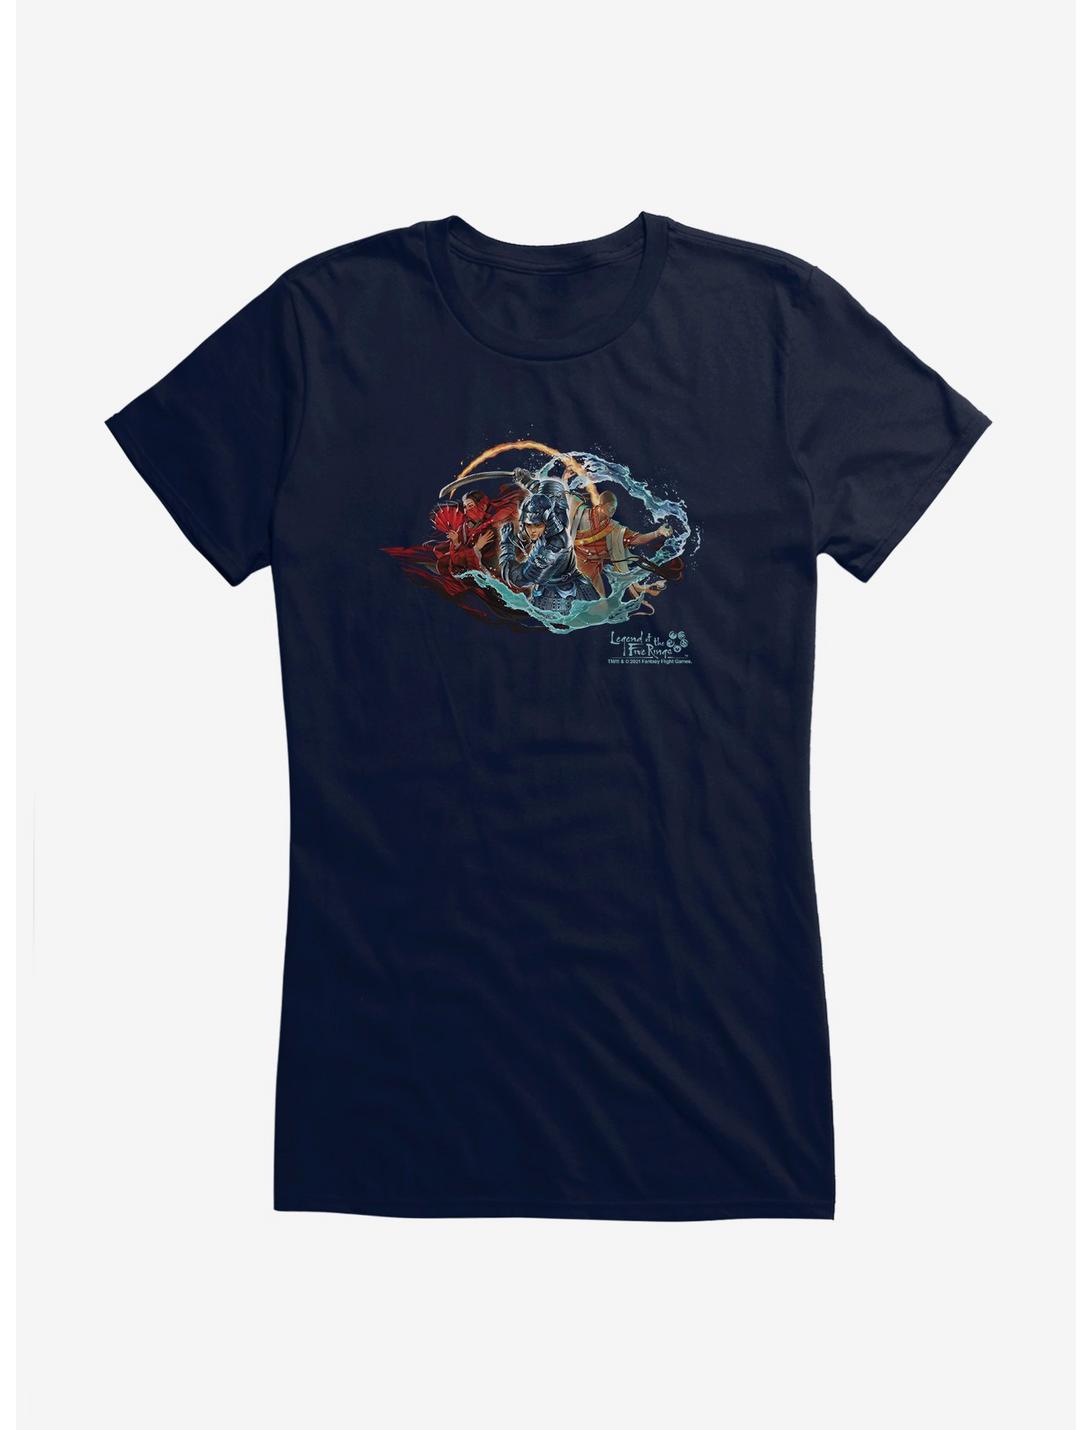 Legend Of The Five Rings Elemental Cycle Girls T-Shirt , NAVY, hi-res